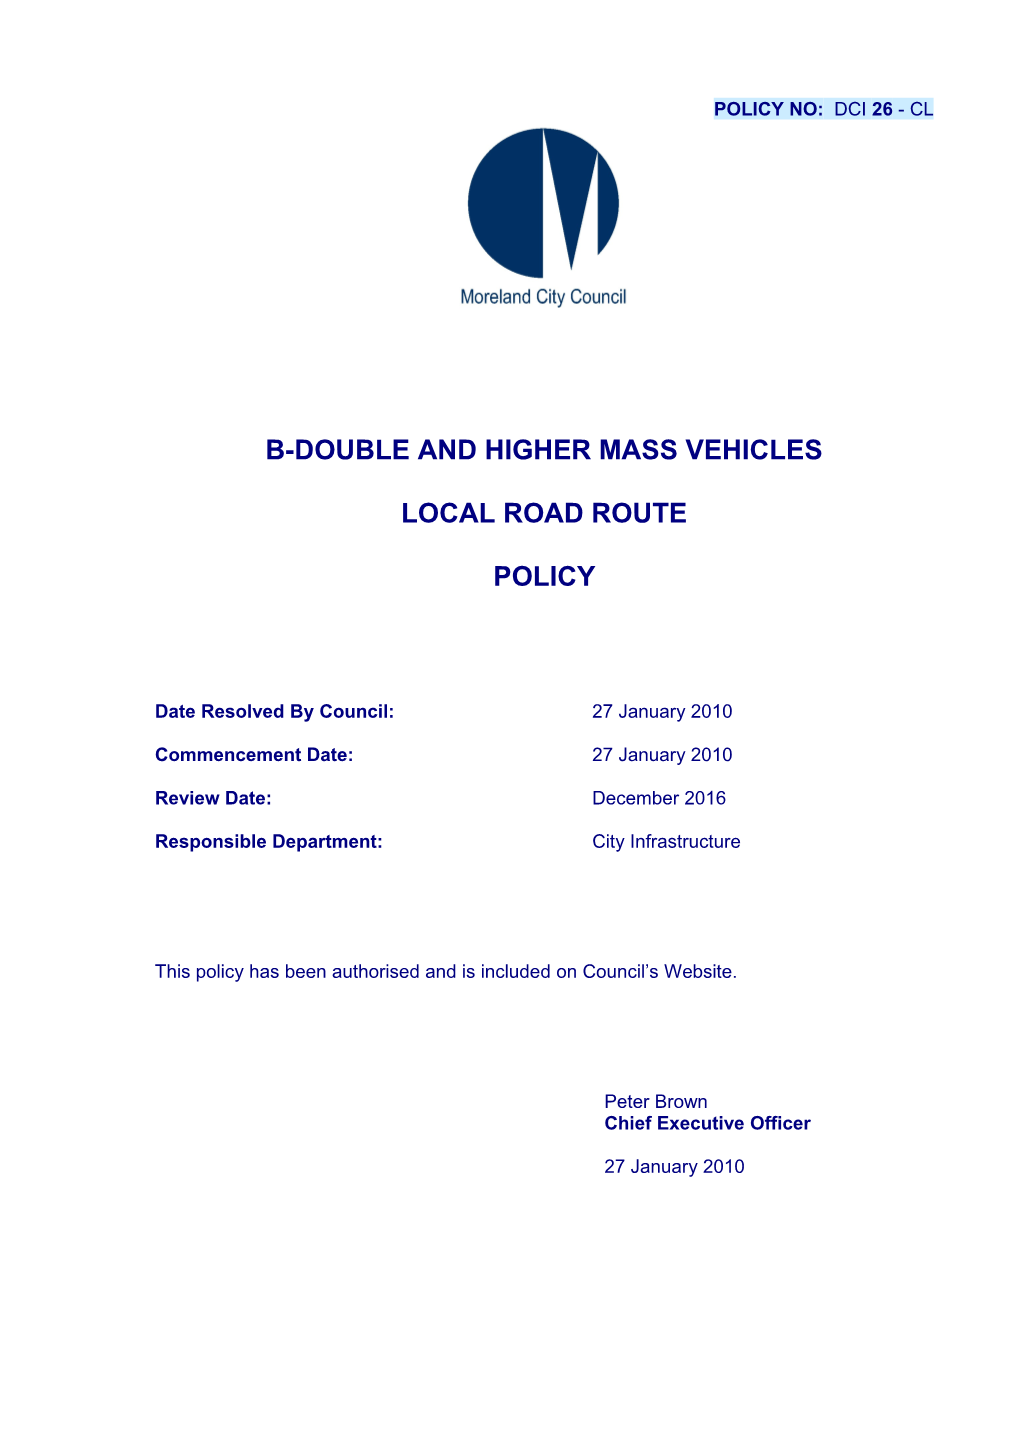 B-Double and Higher Mass Vehicles